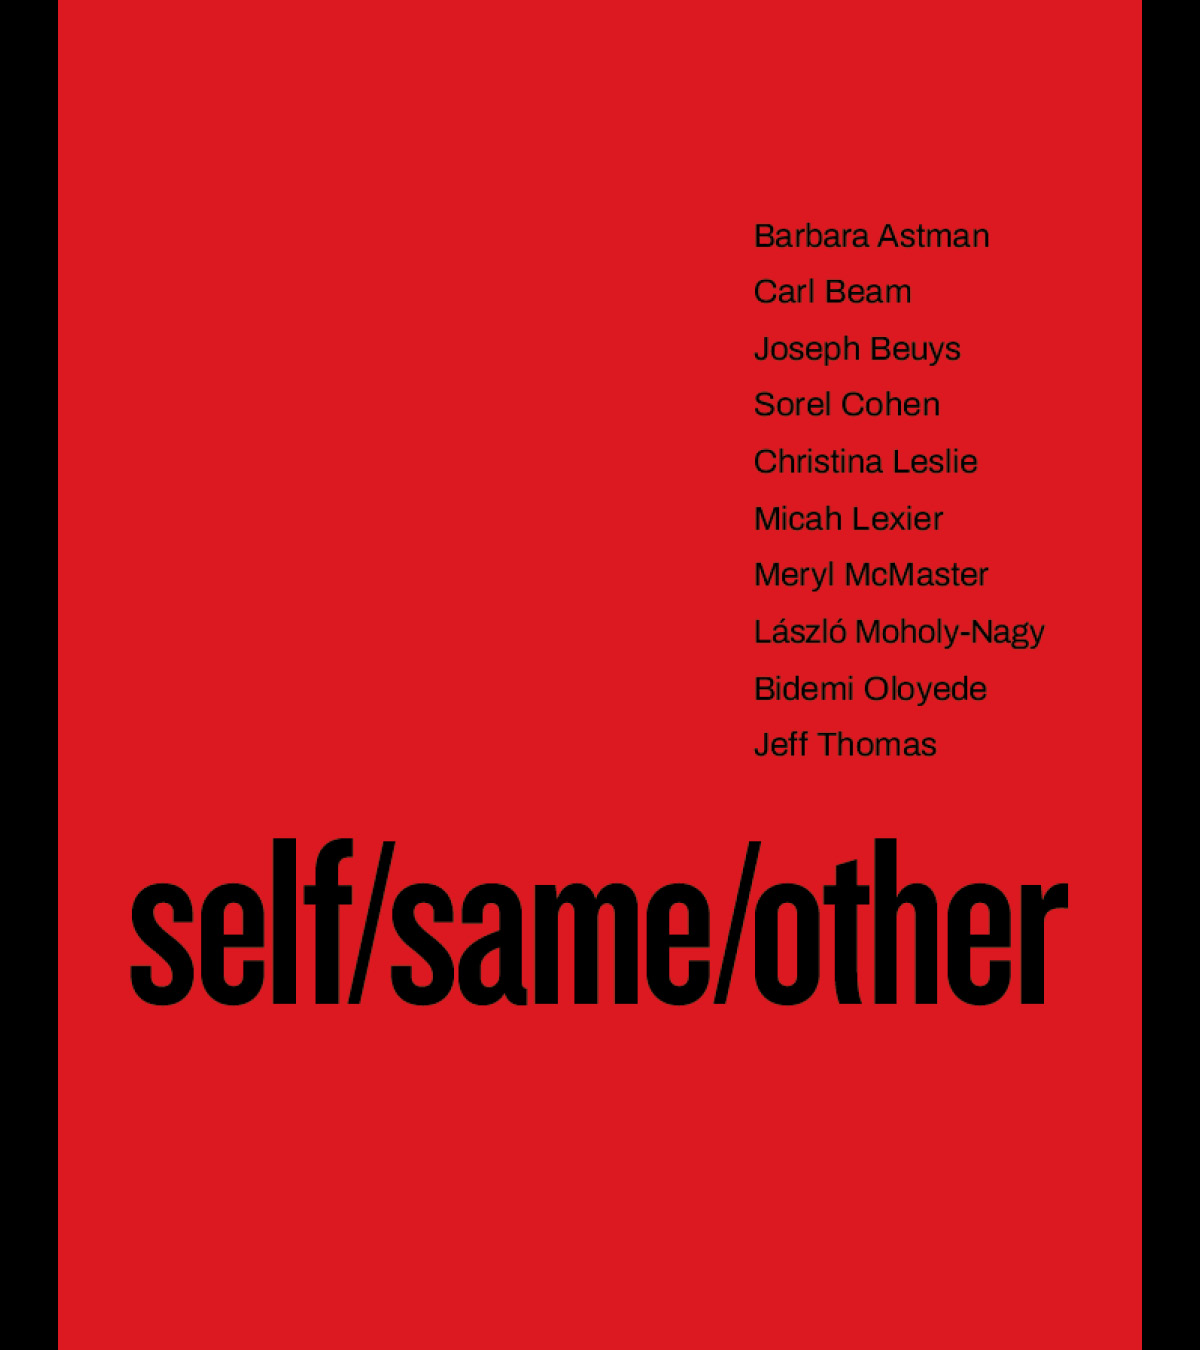 Front cover of self/same/other exhibition catalogue